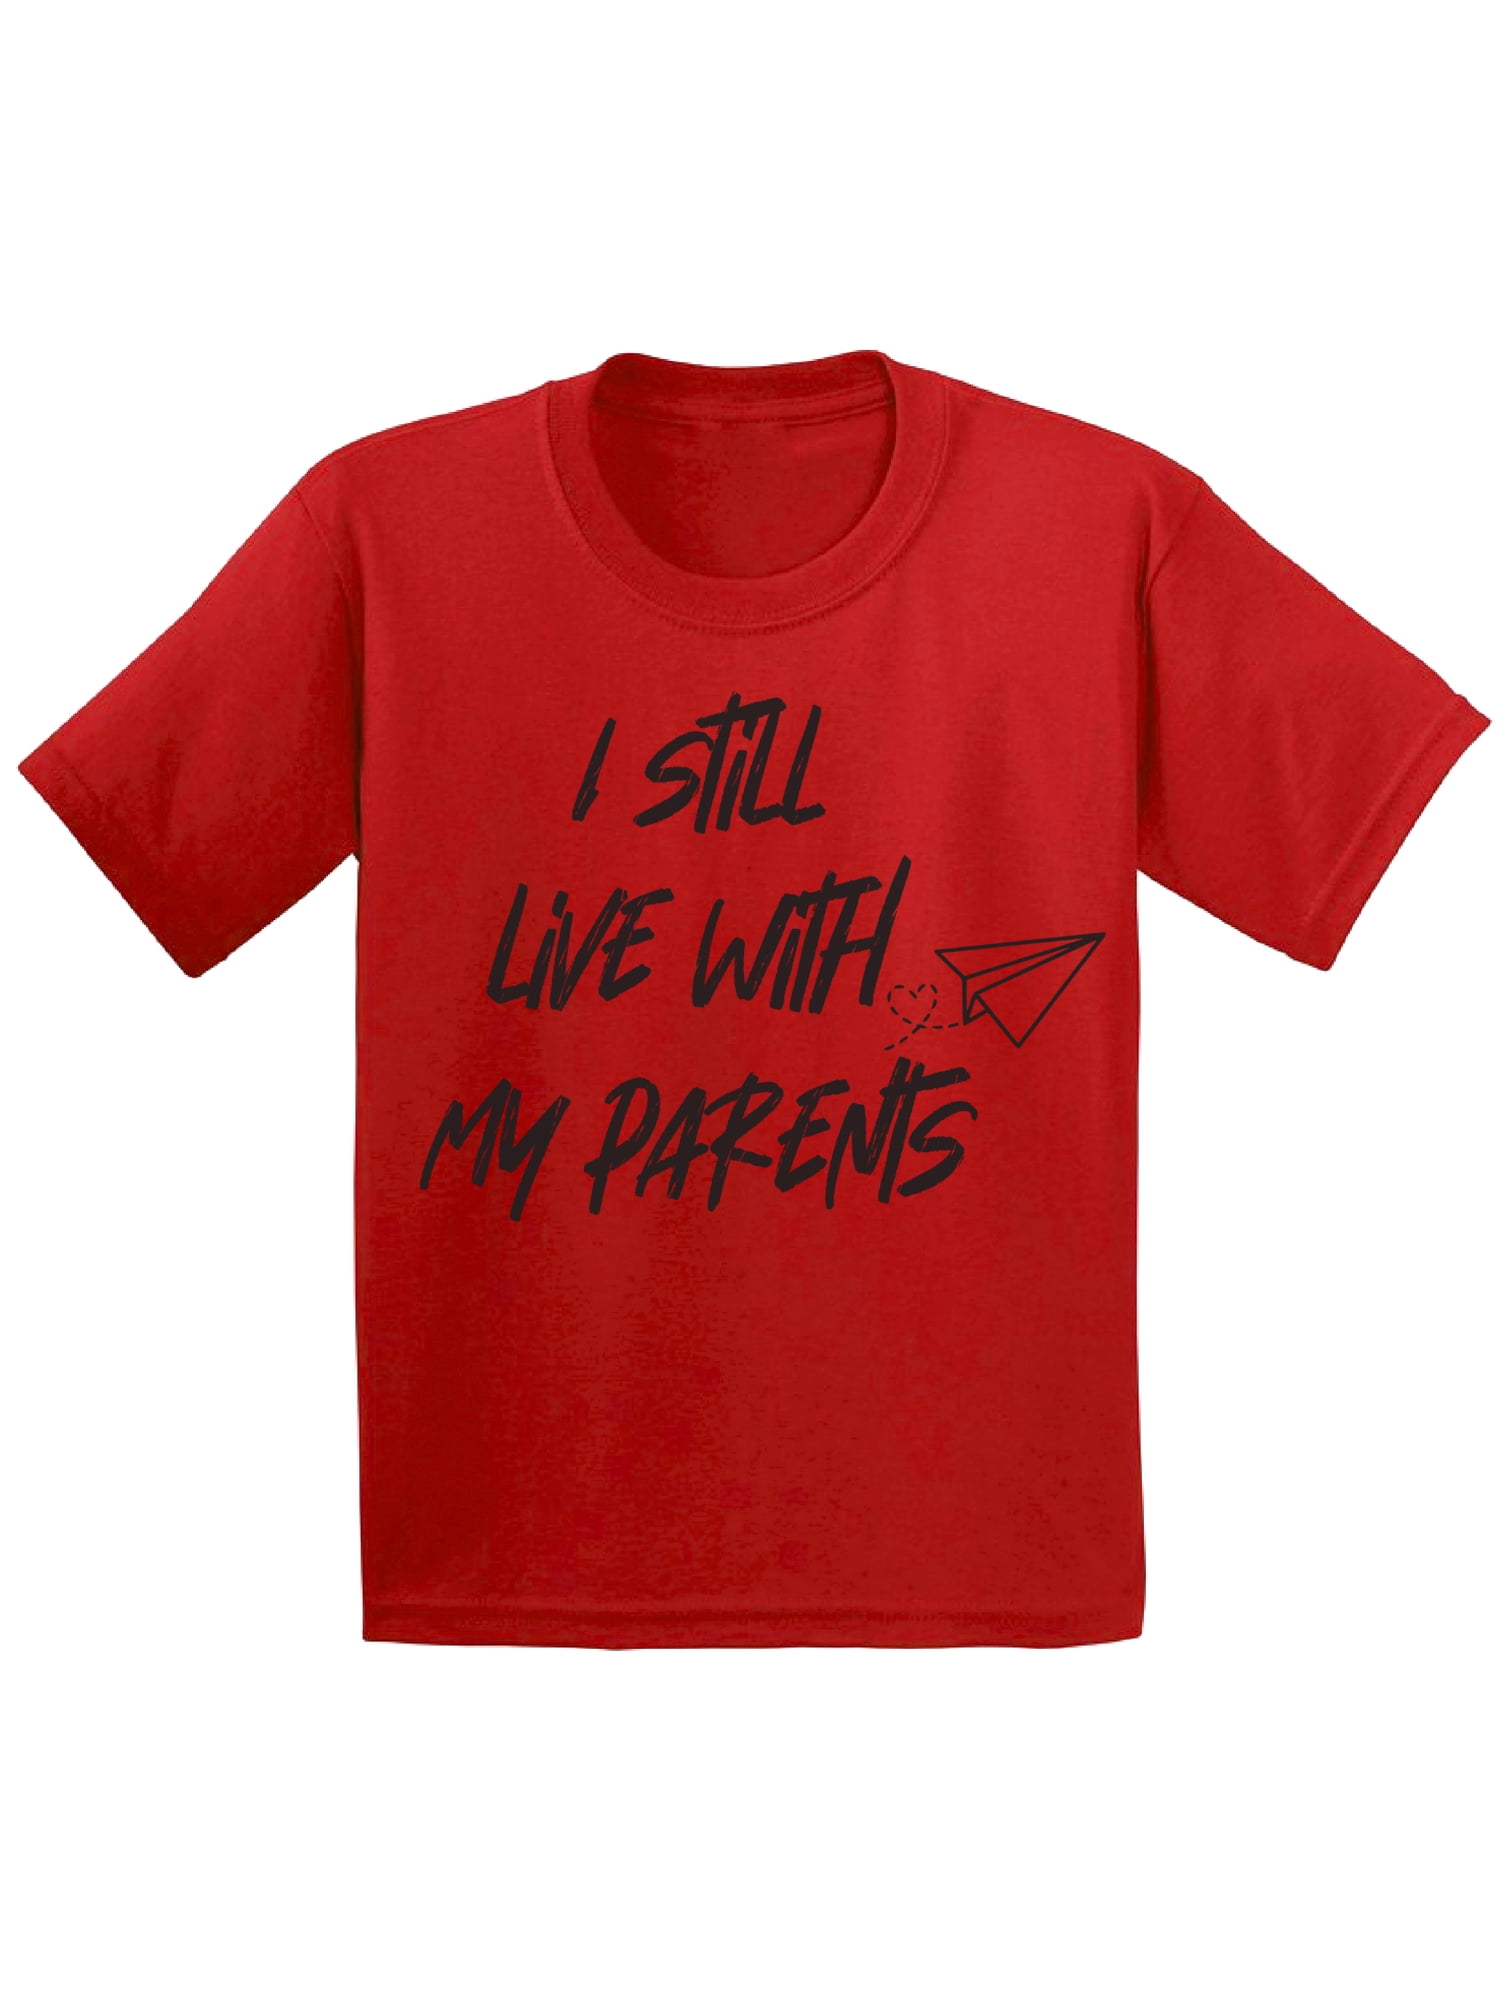 Back to School Youth Shirts for Kids I Still Live With My Parents T Shirt  School Theme Clothing Girls Shirts Boys T Shirts Funny School Gifts for  Children 